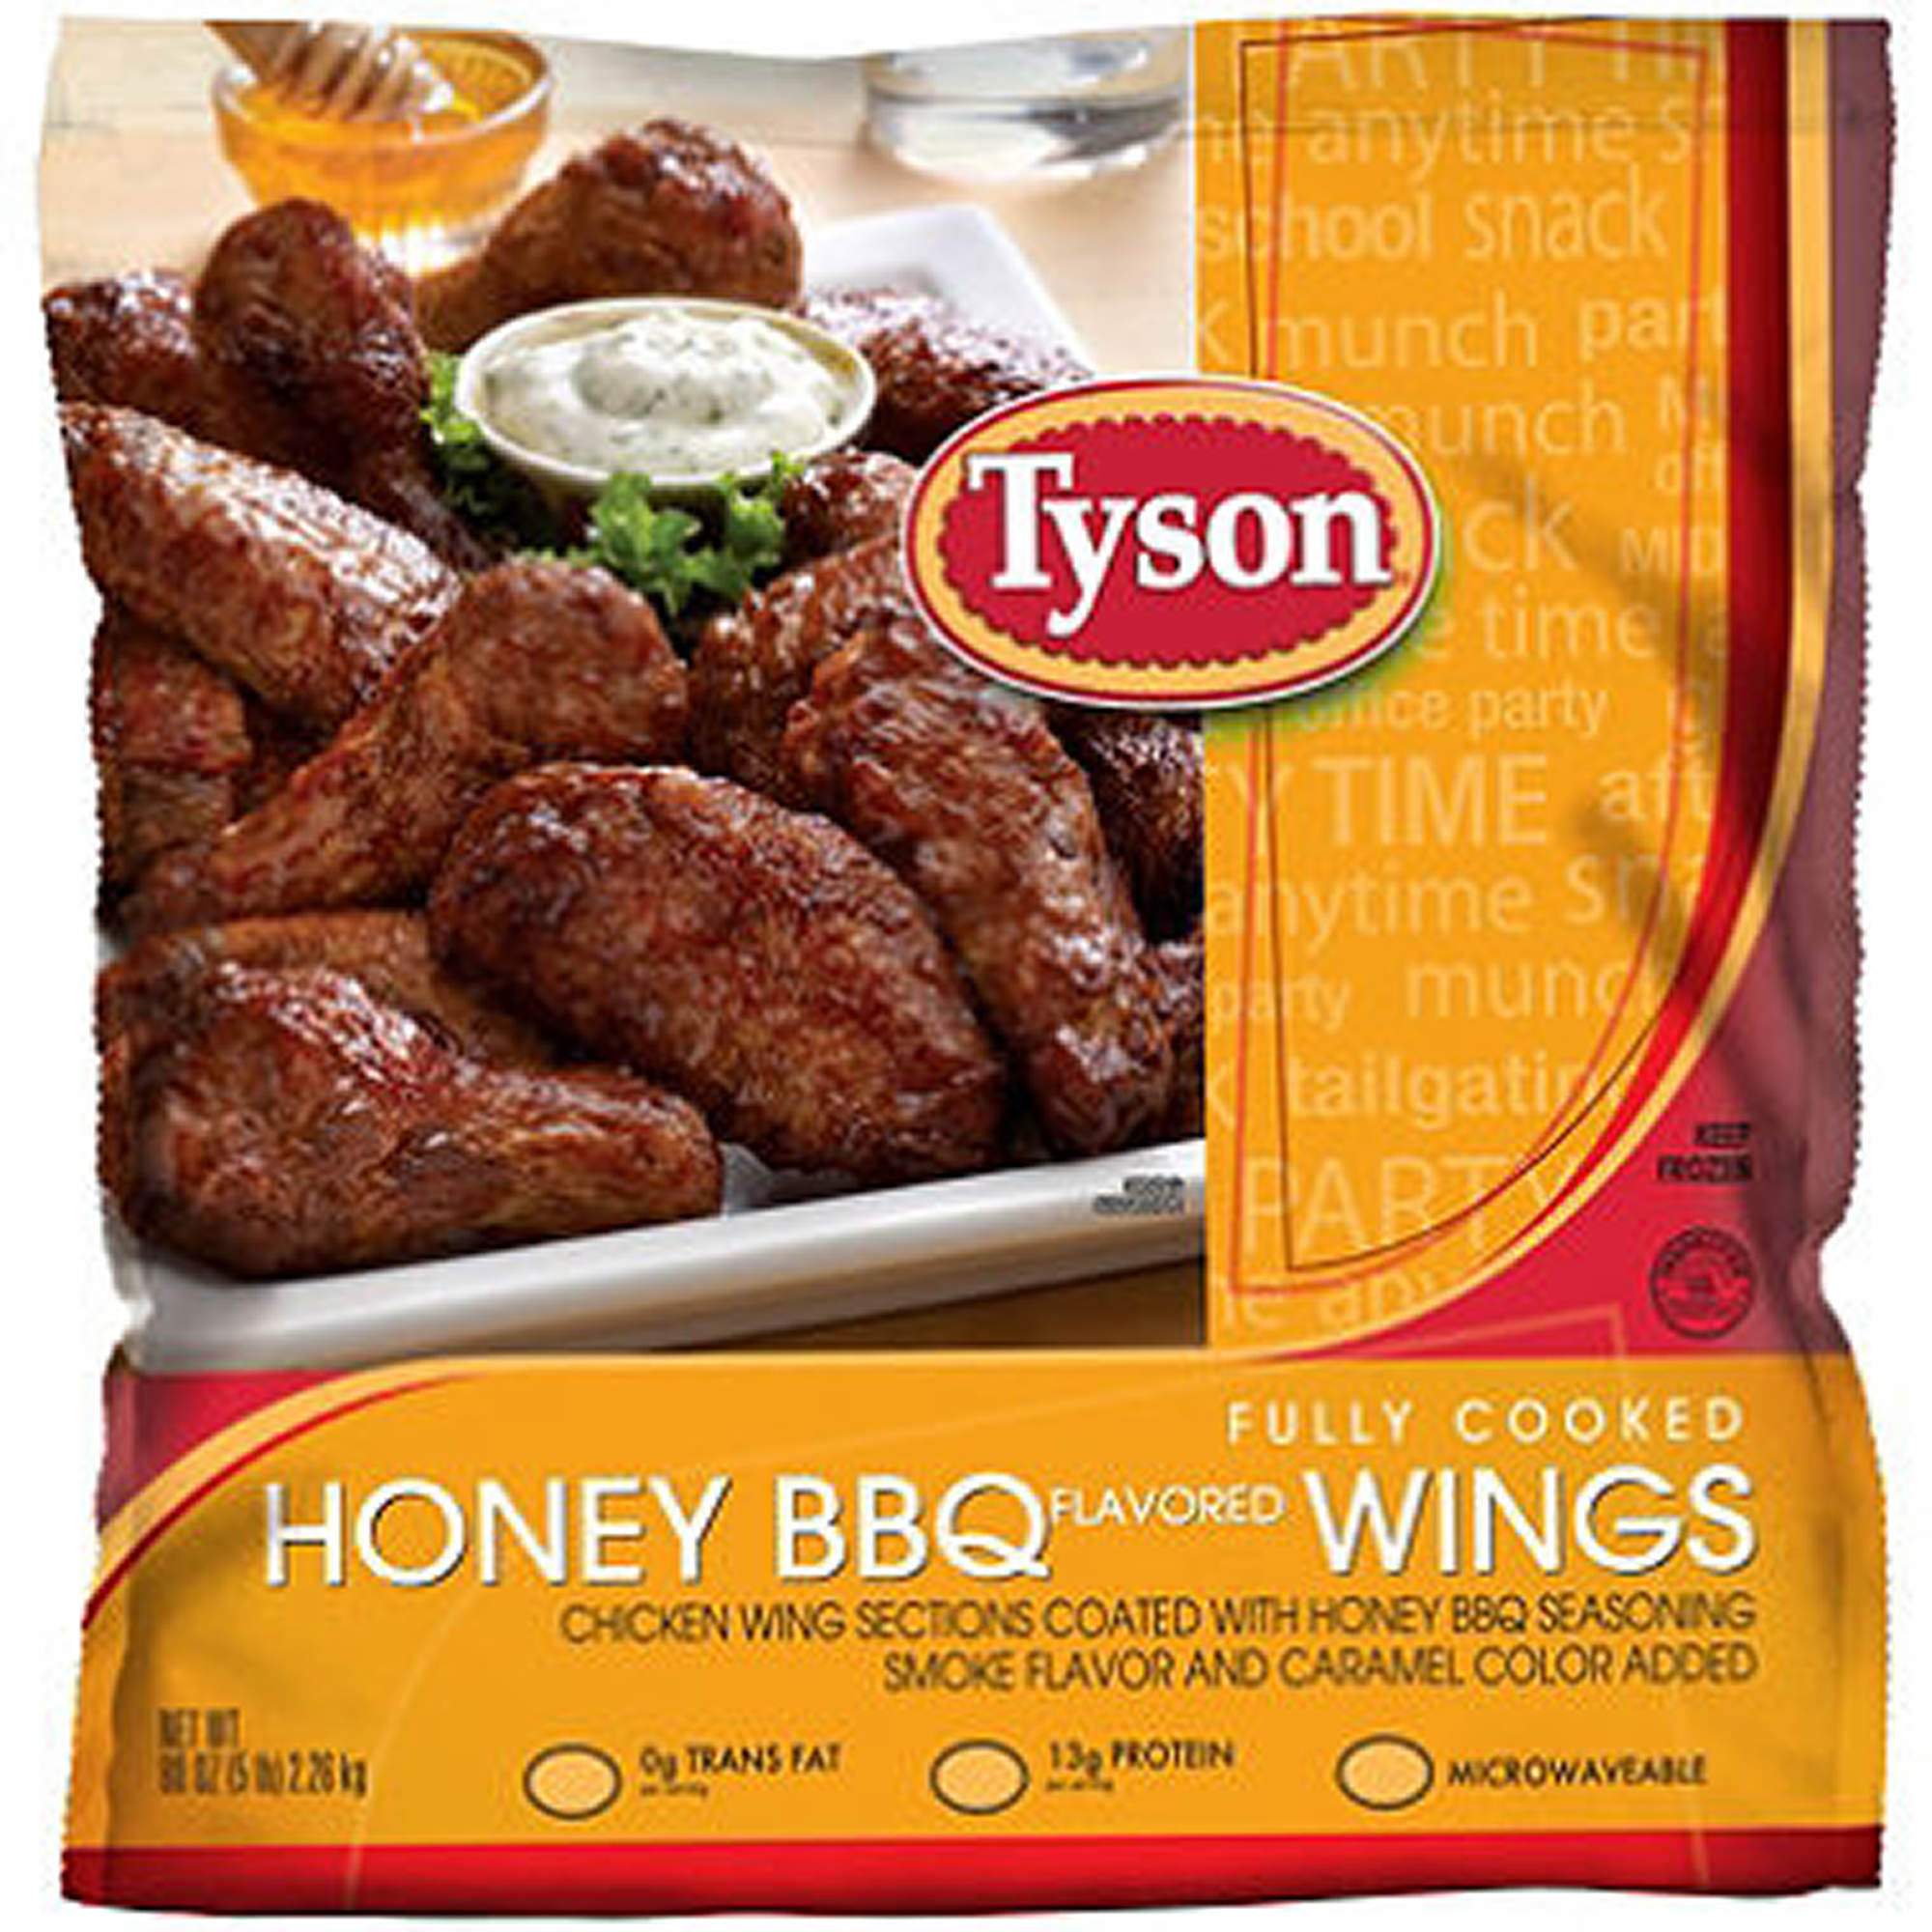 Tyson Fully Cooked Honey Barbecue Flavored Wings 5 lbs BJ s 